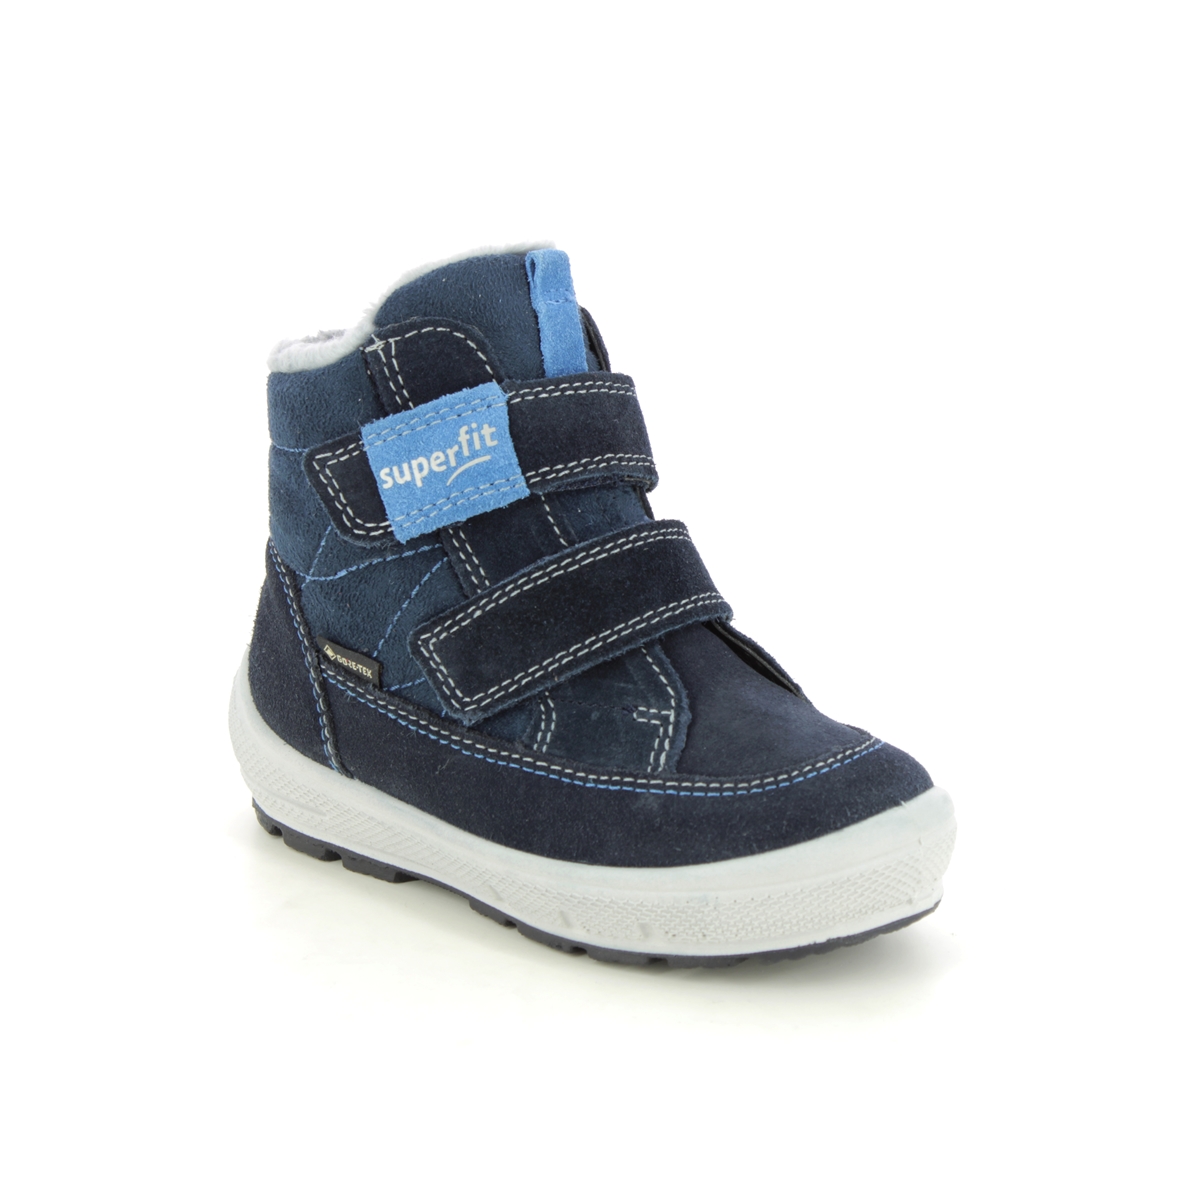 Superfit Groovy Gtx Navy Kids Toddler Boys Boots 1009314-8000 In Size 22 In Plain Navy